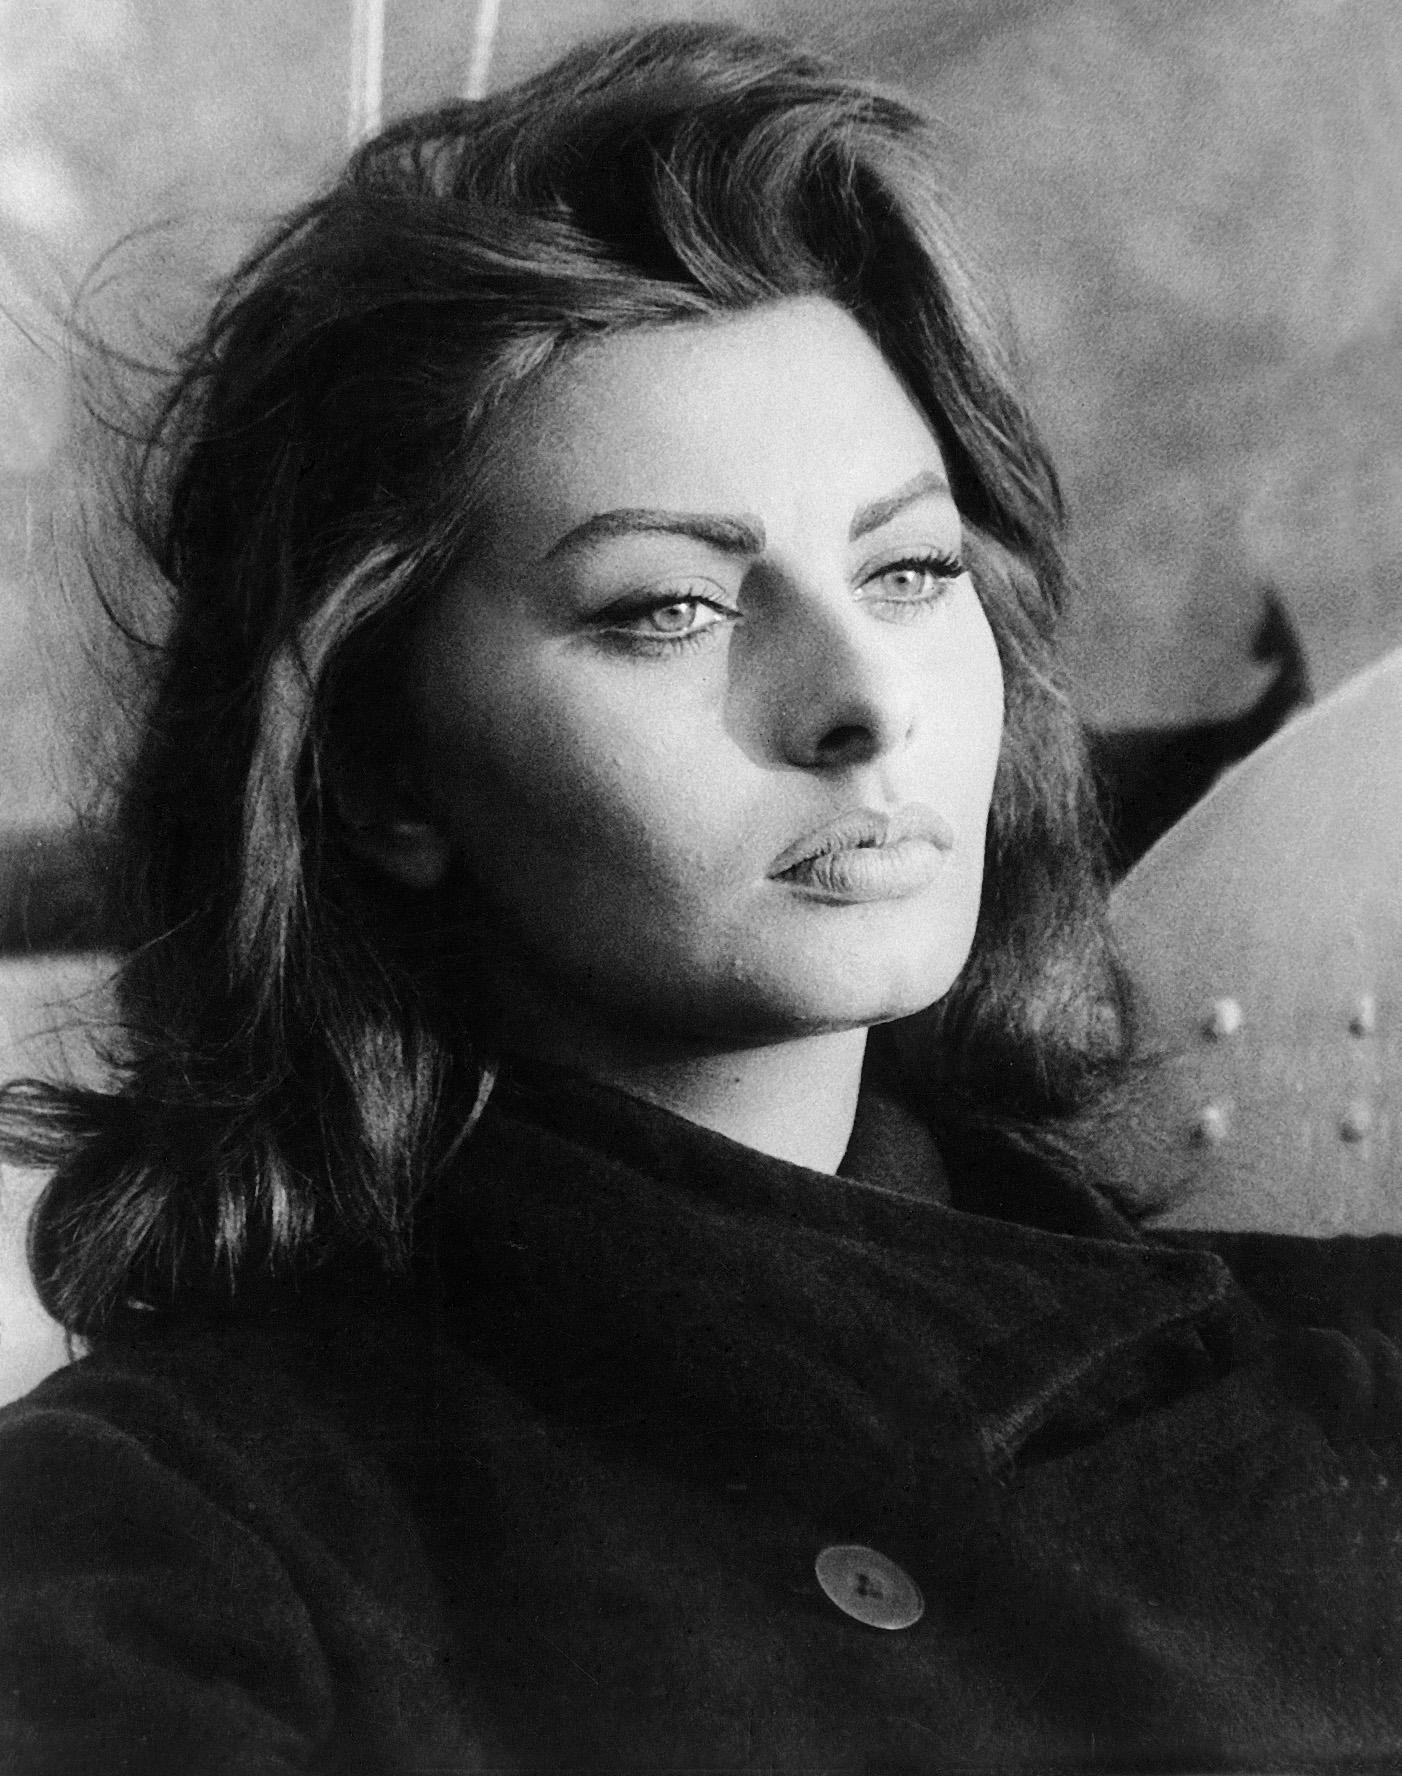 Sophia Loren. Can't believe I found a pic of her around my age. I